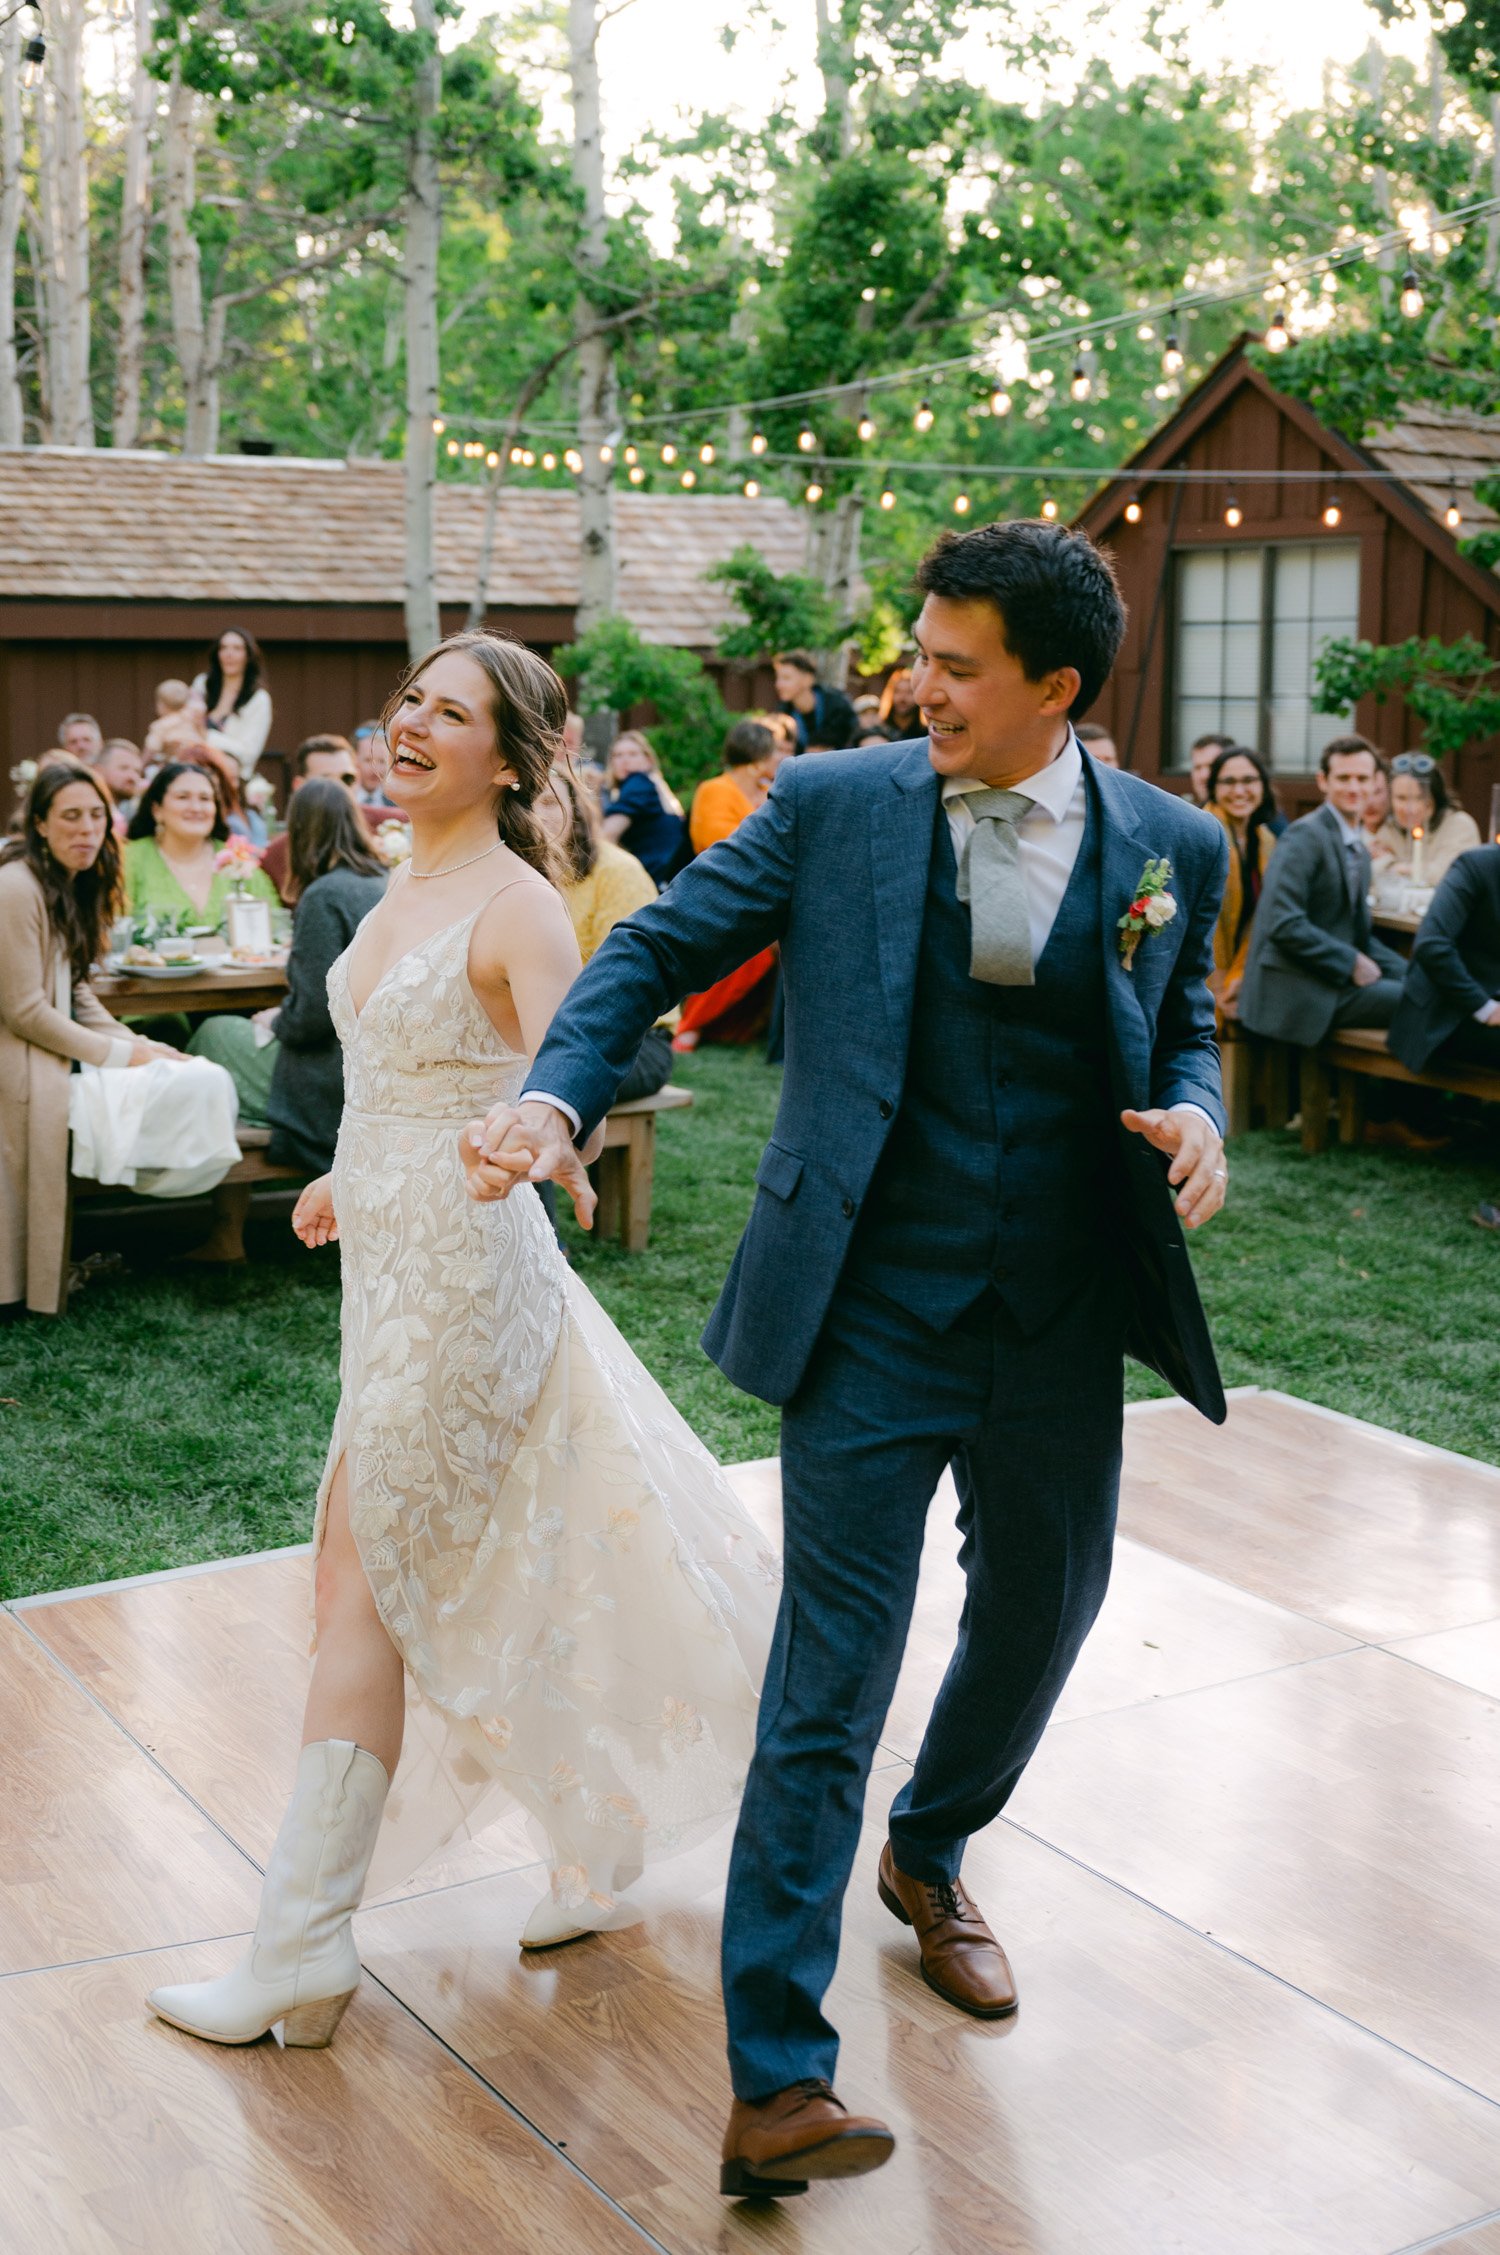 Desolation wilderness hotel wedding, photo of newlywed couple dancing to their favorite song